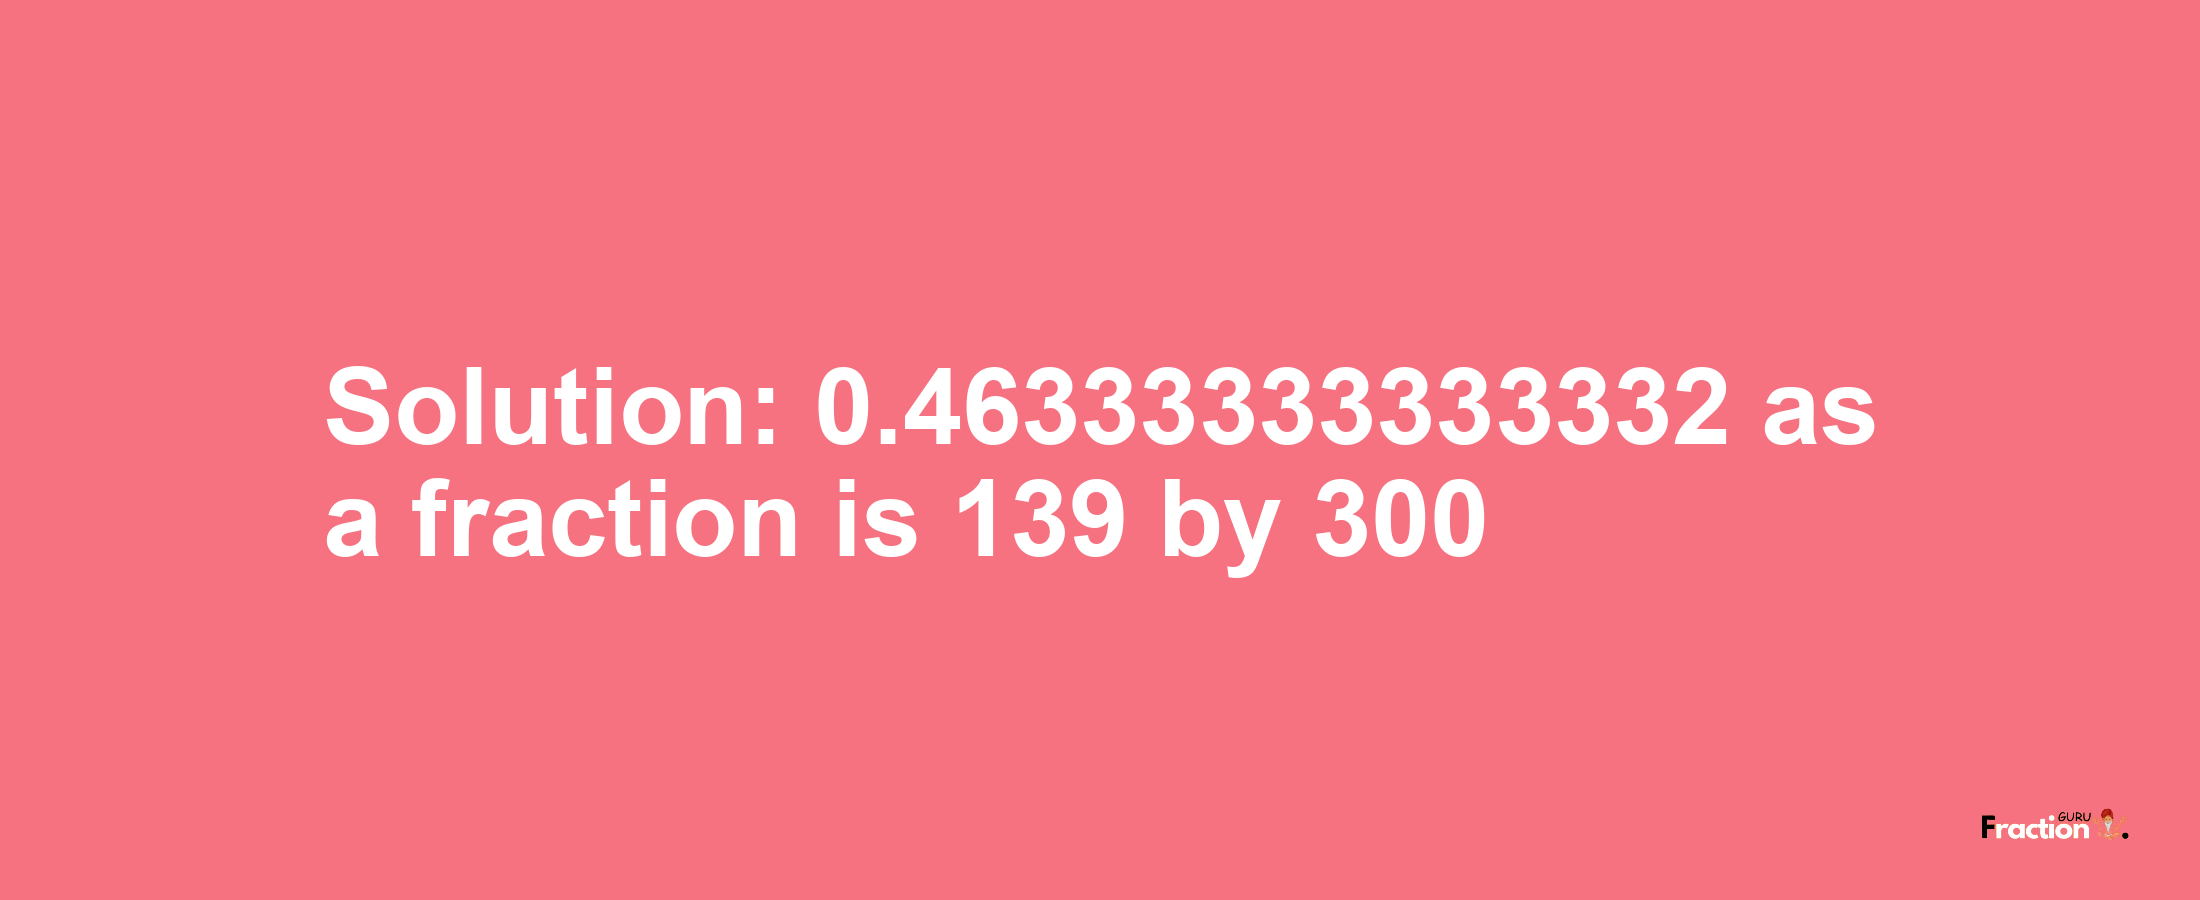 Solution:0.46333333333332 as a fraction is 139/300